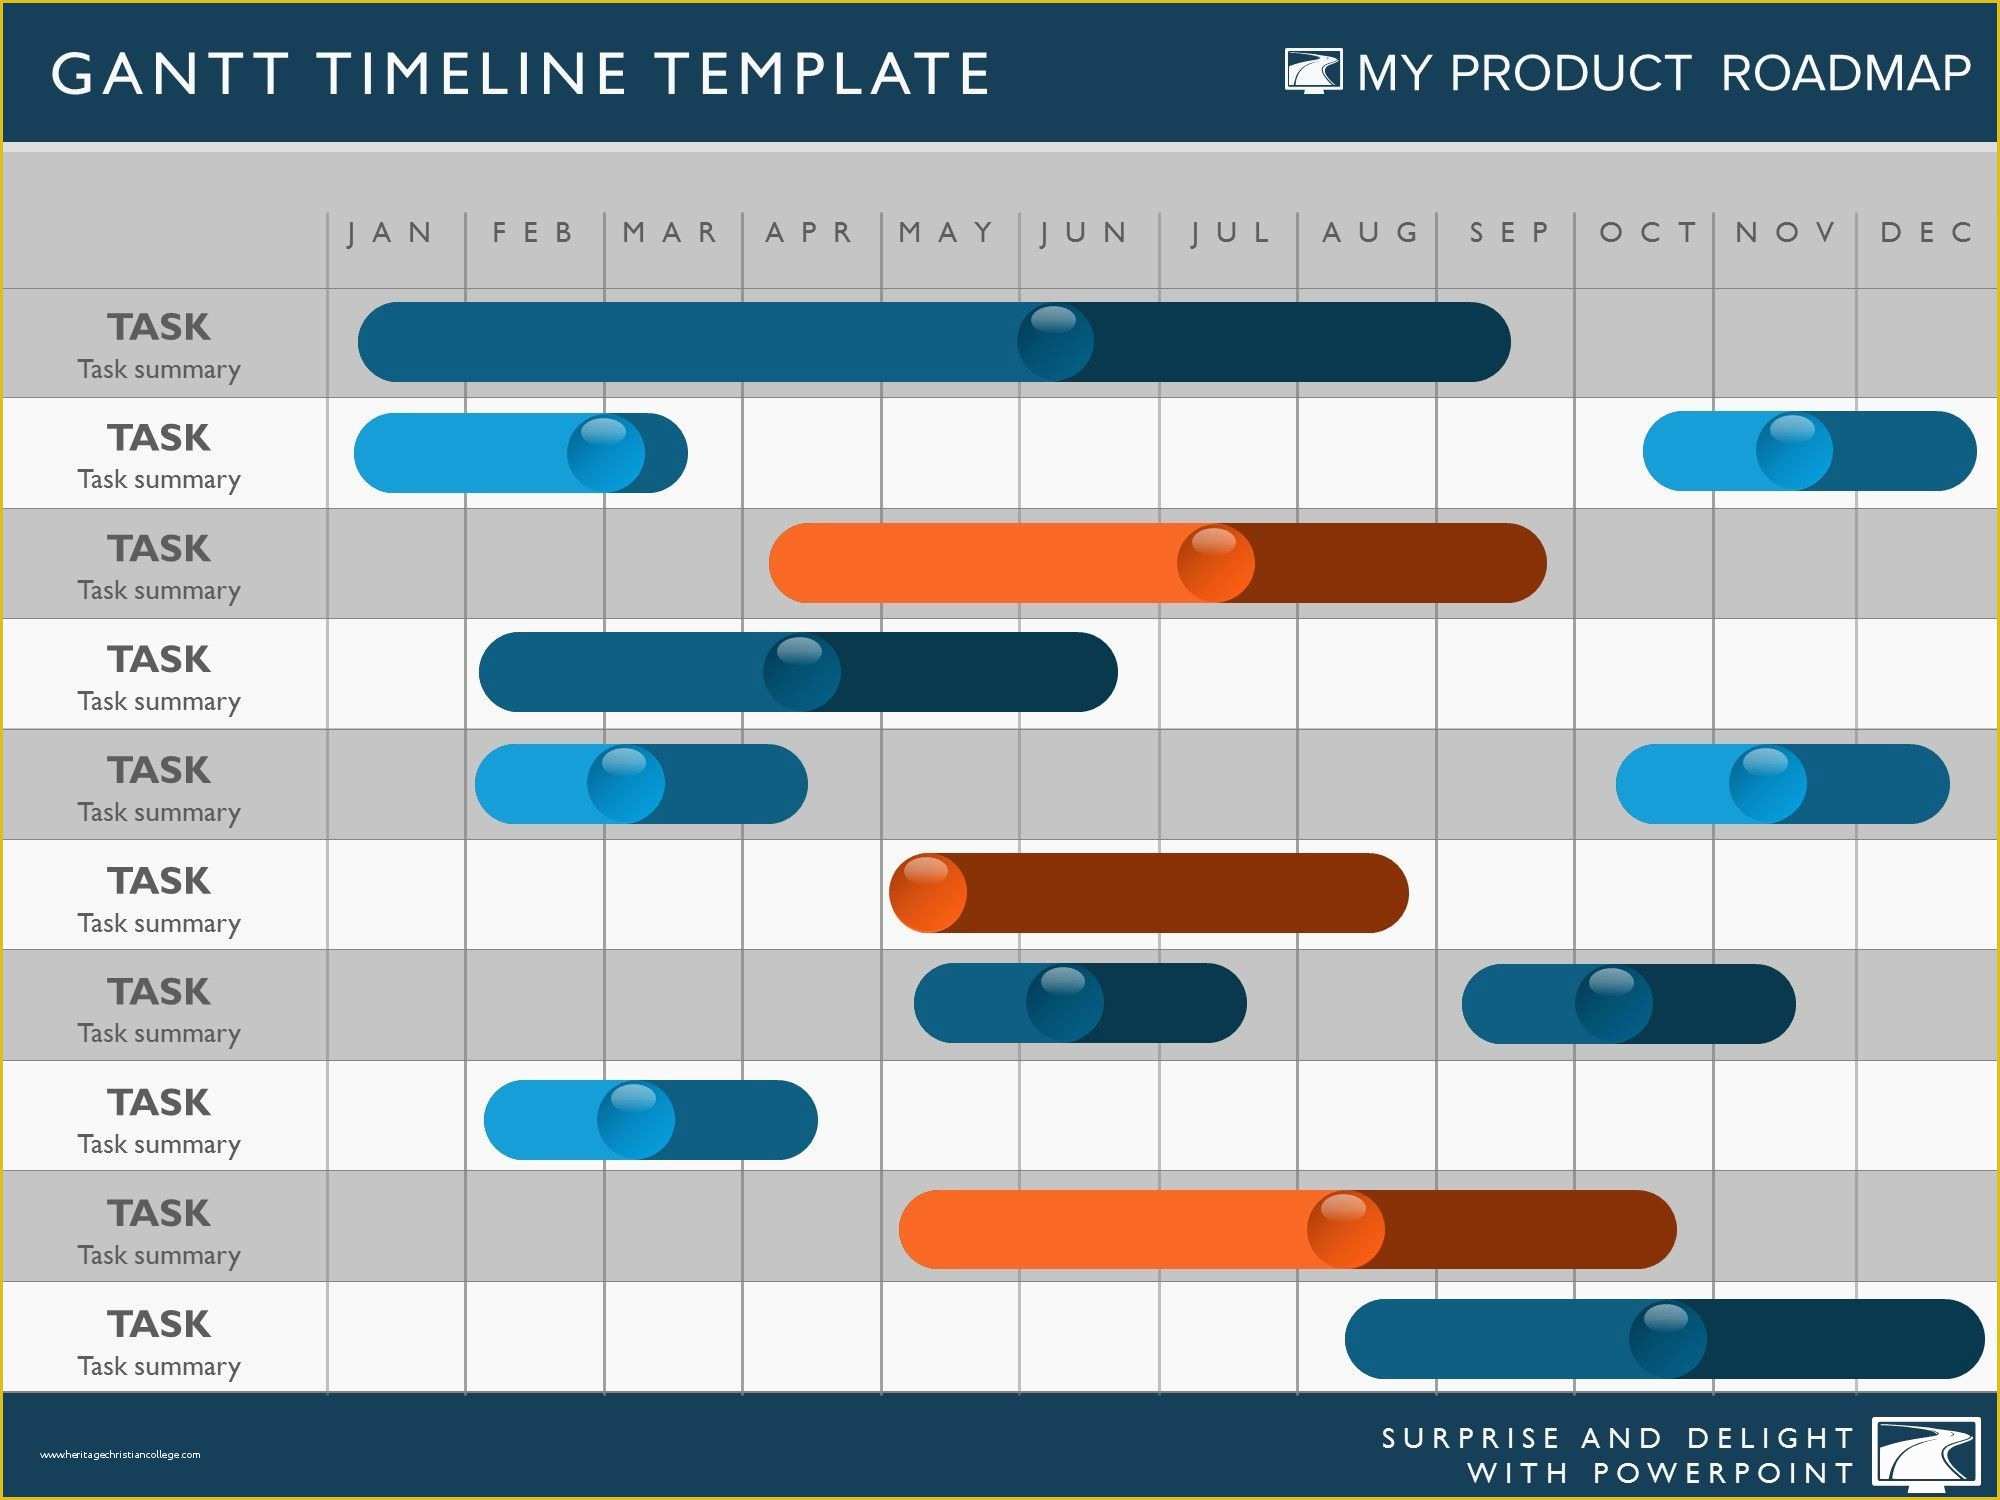 Free Roadmap Template Powerpoint Of Timeline Template – My Product Roadmap